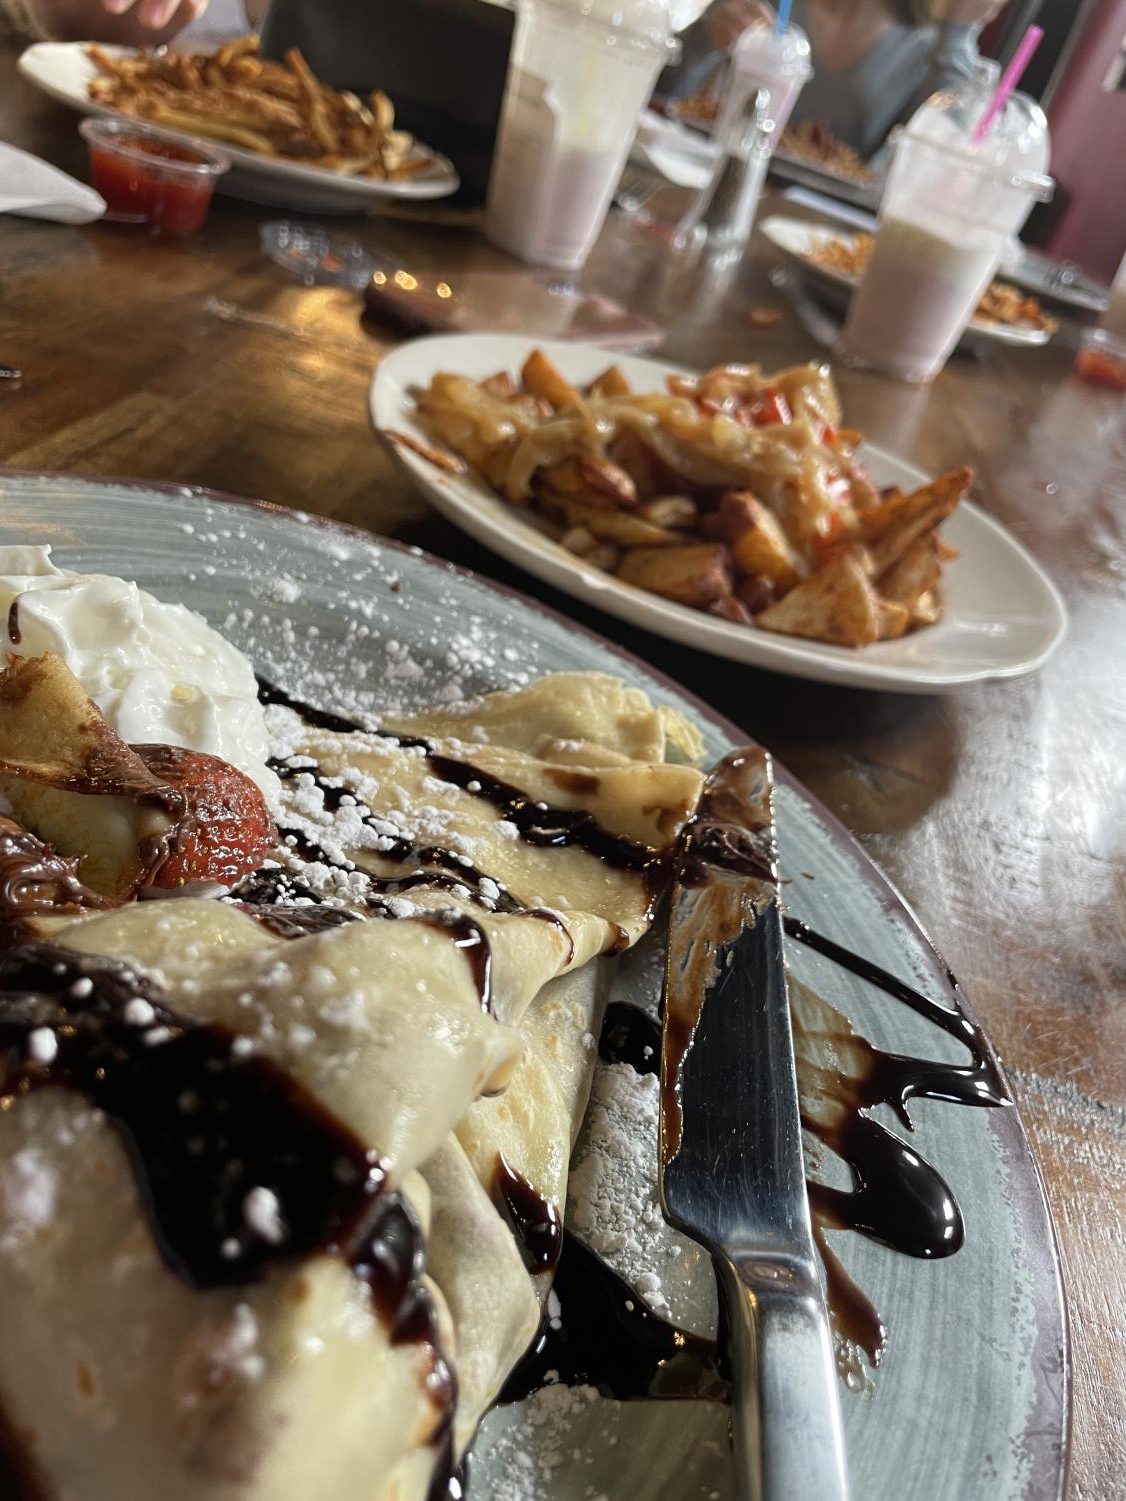 M, mm, Mmm! Here is the Nutella crepe and breakfast potatoes. Only a few minutes later, that food was gone! The flavors are melting on my tongue! said eighth grader Vionna Jackson. 